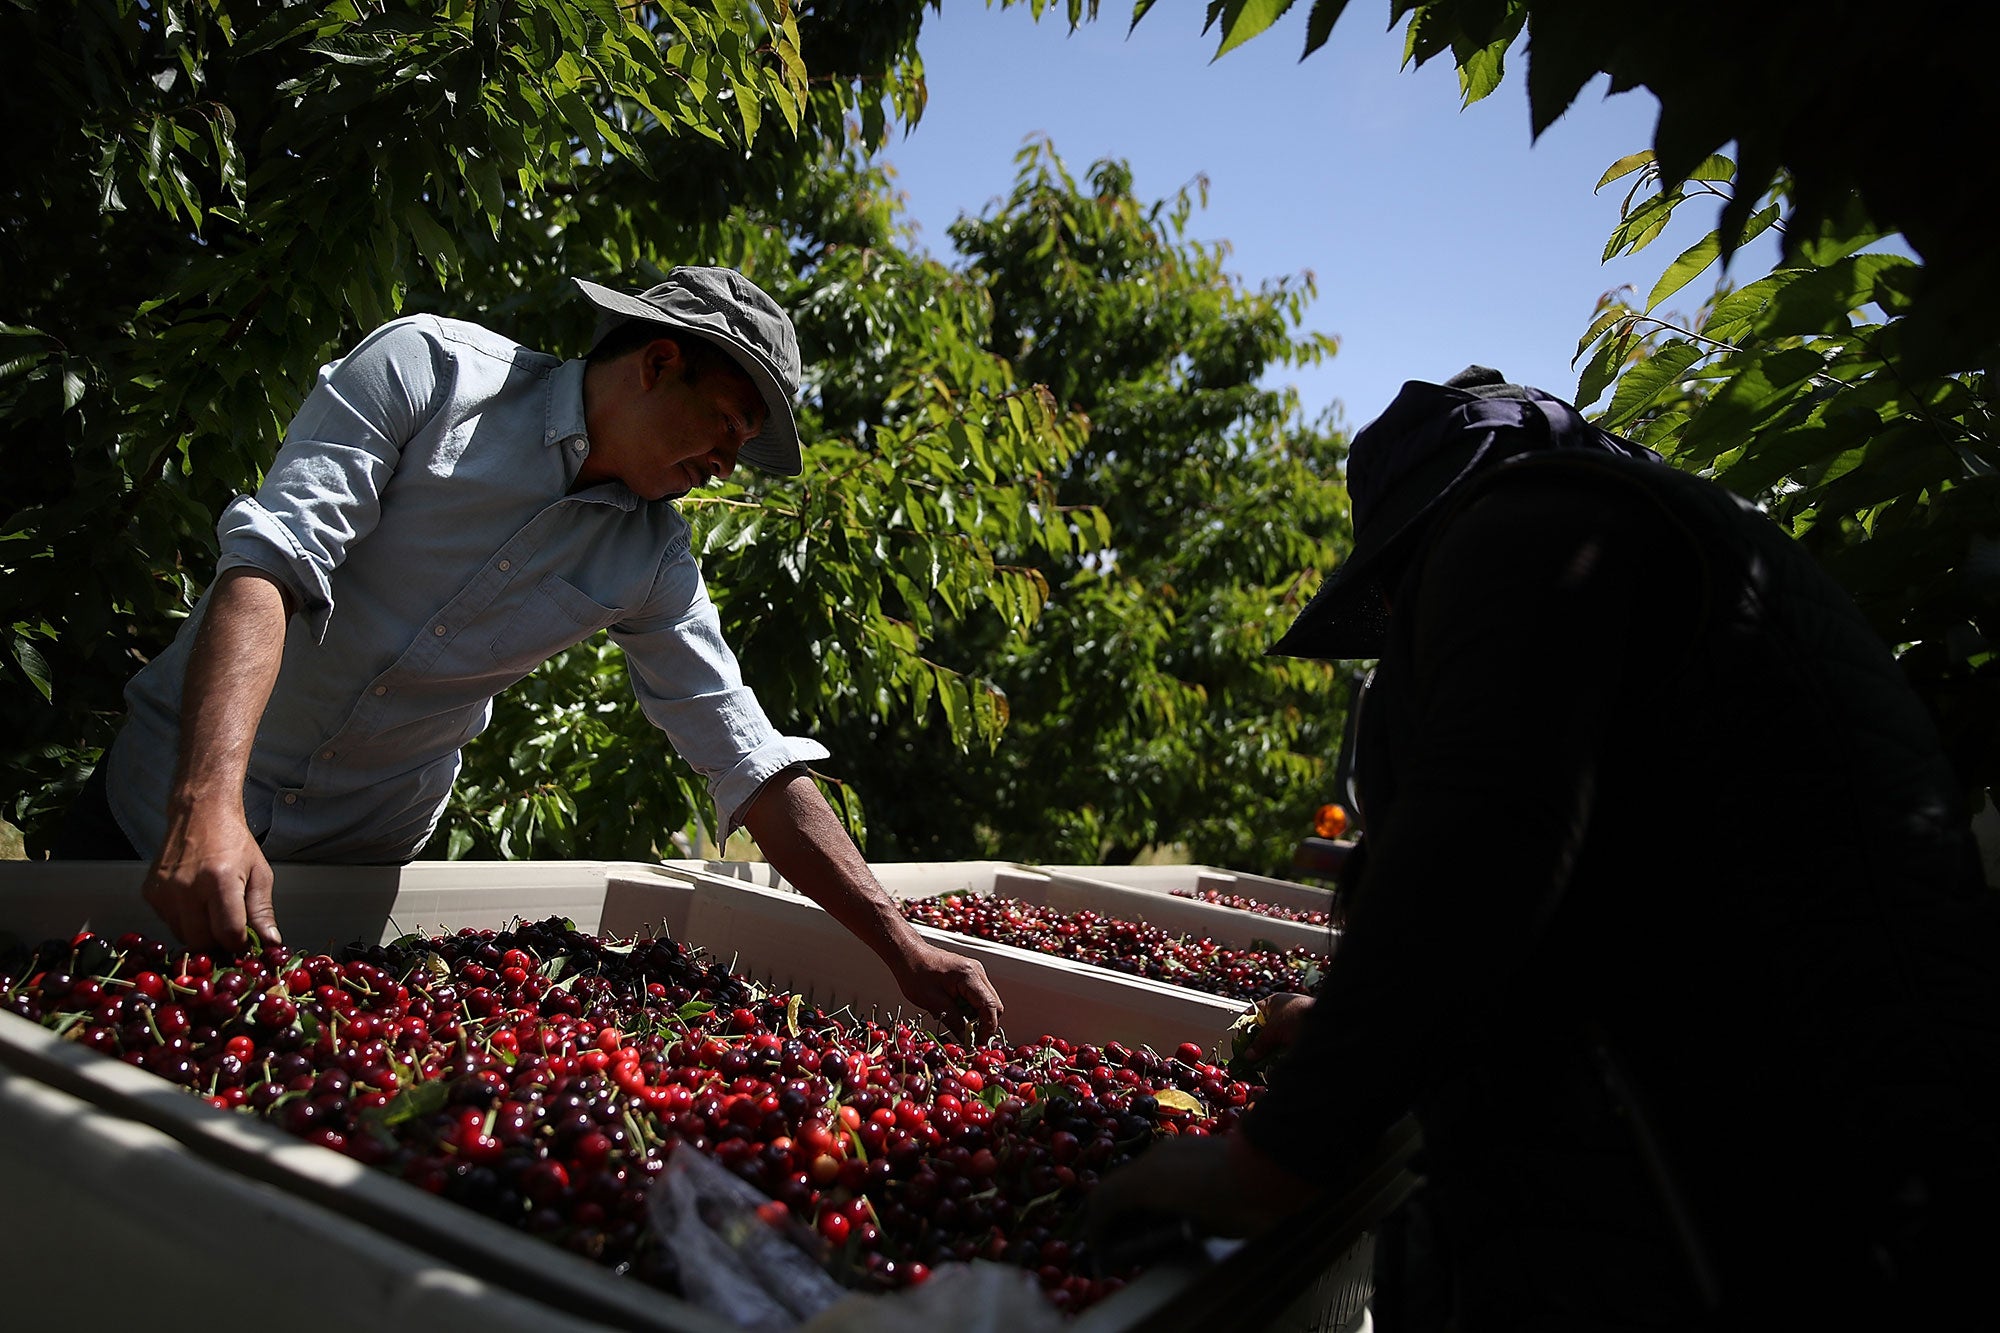 Agricultural workers pull leaves from a bin of freshly picked cherries.